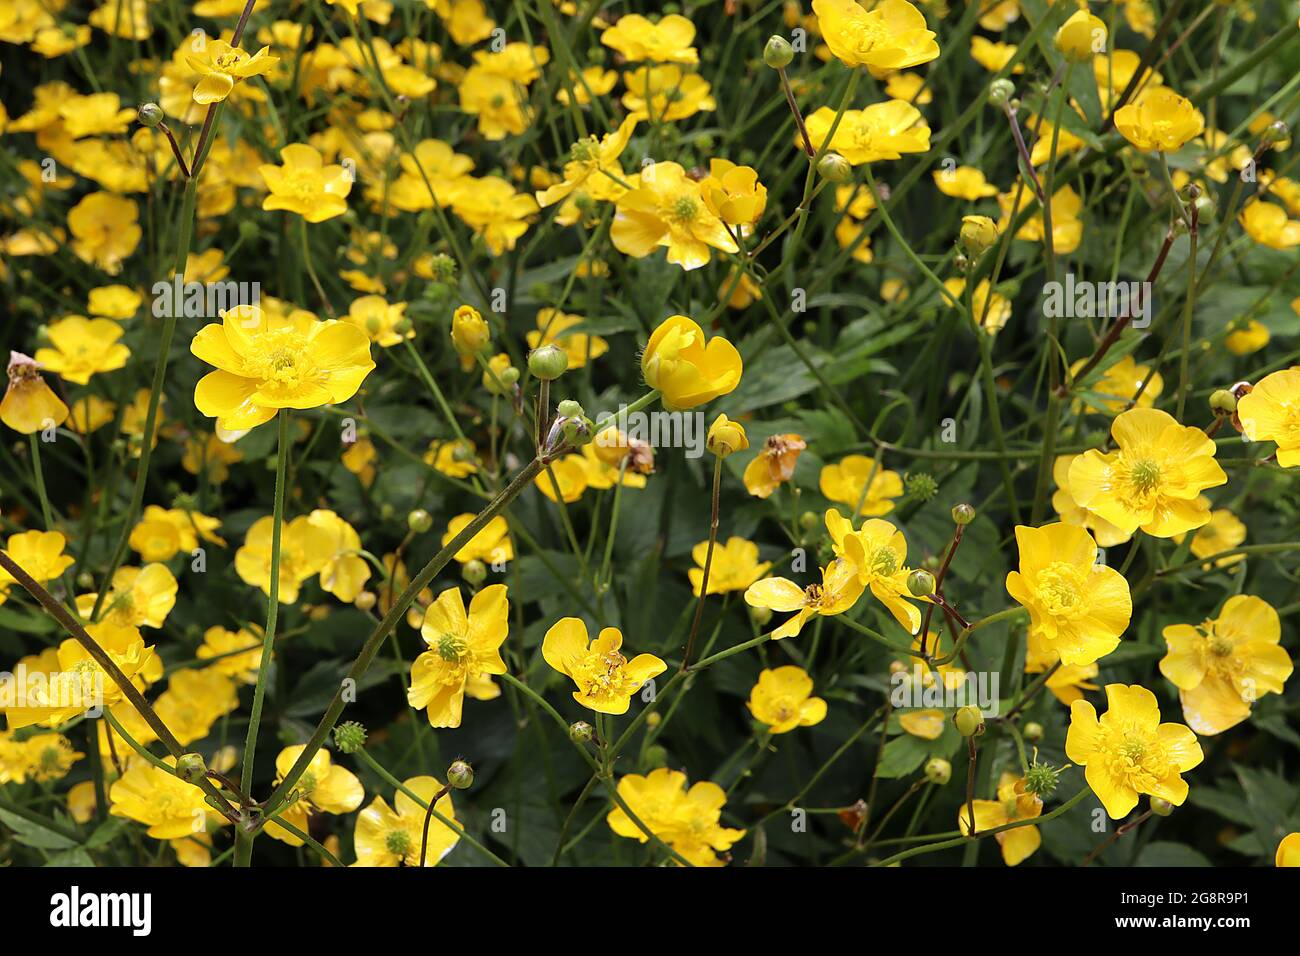 Ranunculus acris Meadow buttercup – yellow cup-shaped flowers with glossy petals on tall stems,  May, England, UK Stock Photo